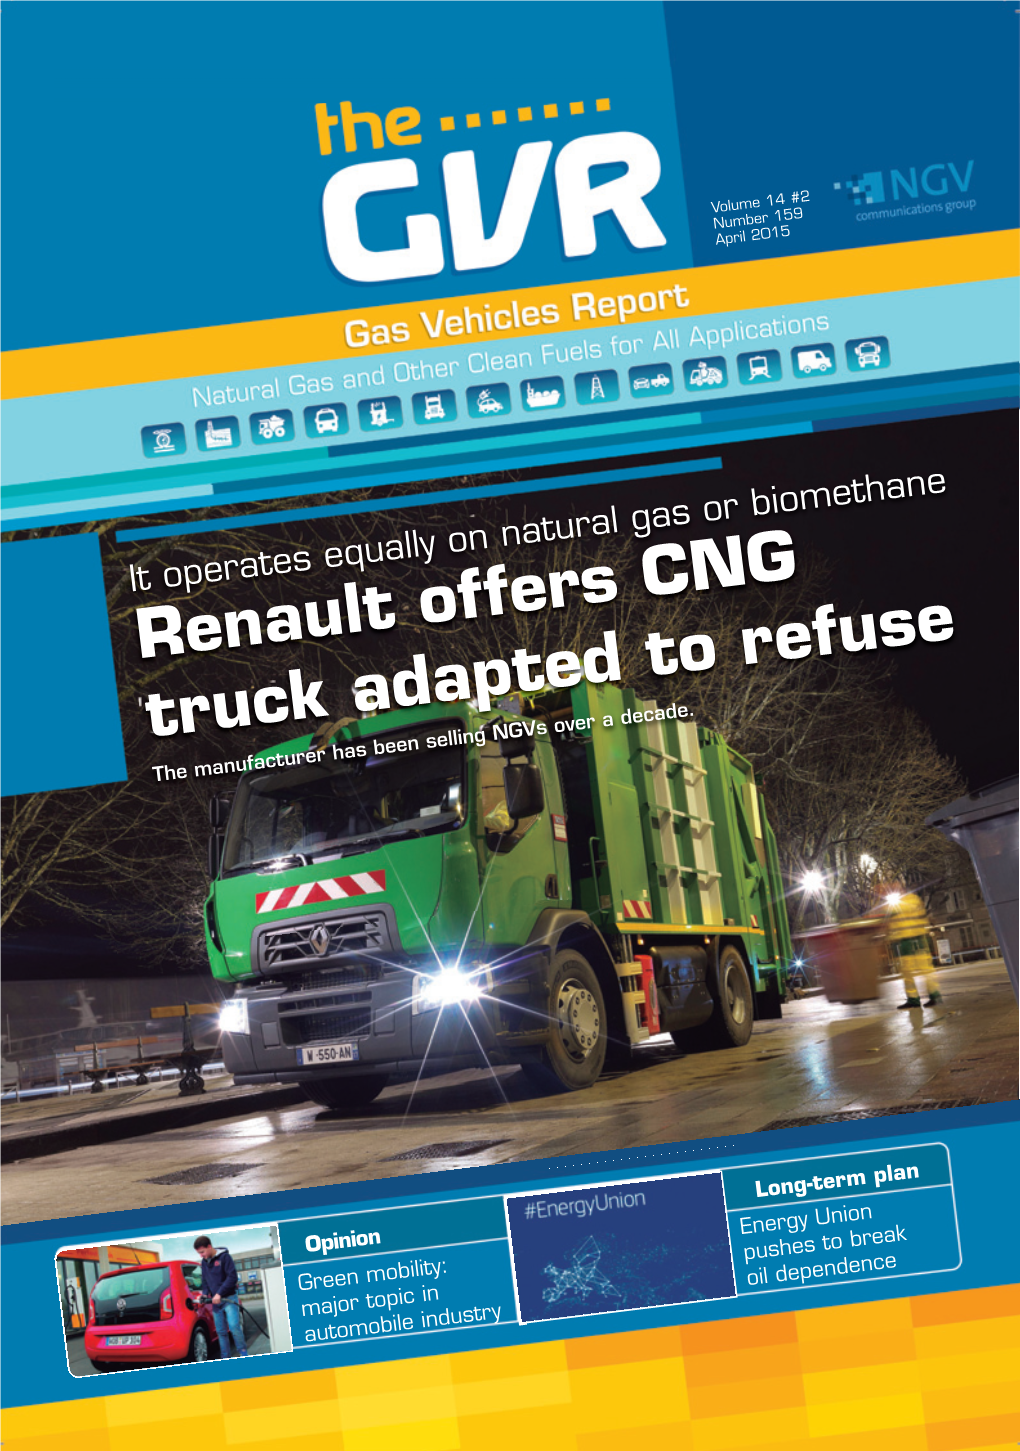 Renault Offers CNG Truck Adapted to Refuse the Manufacturer Has Been Selling Ngvs Over a Decade